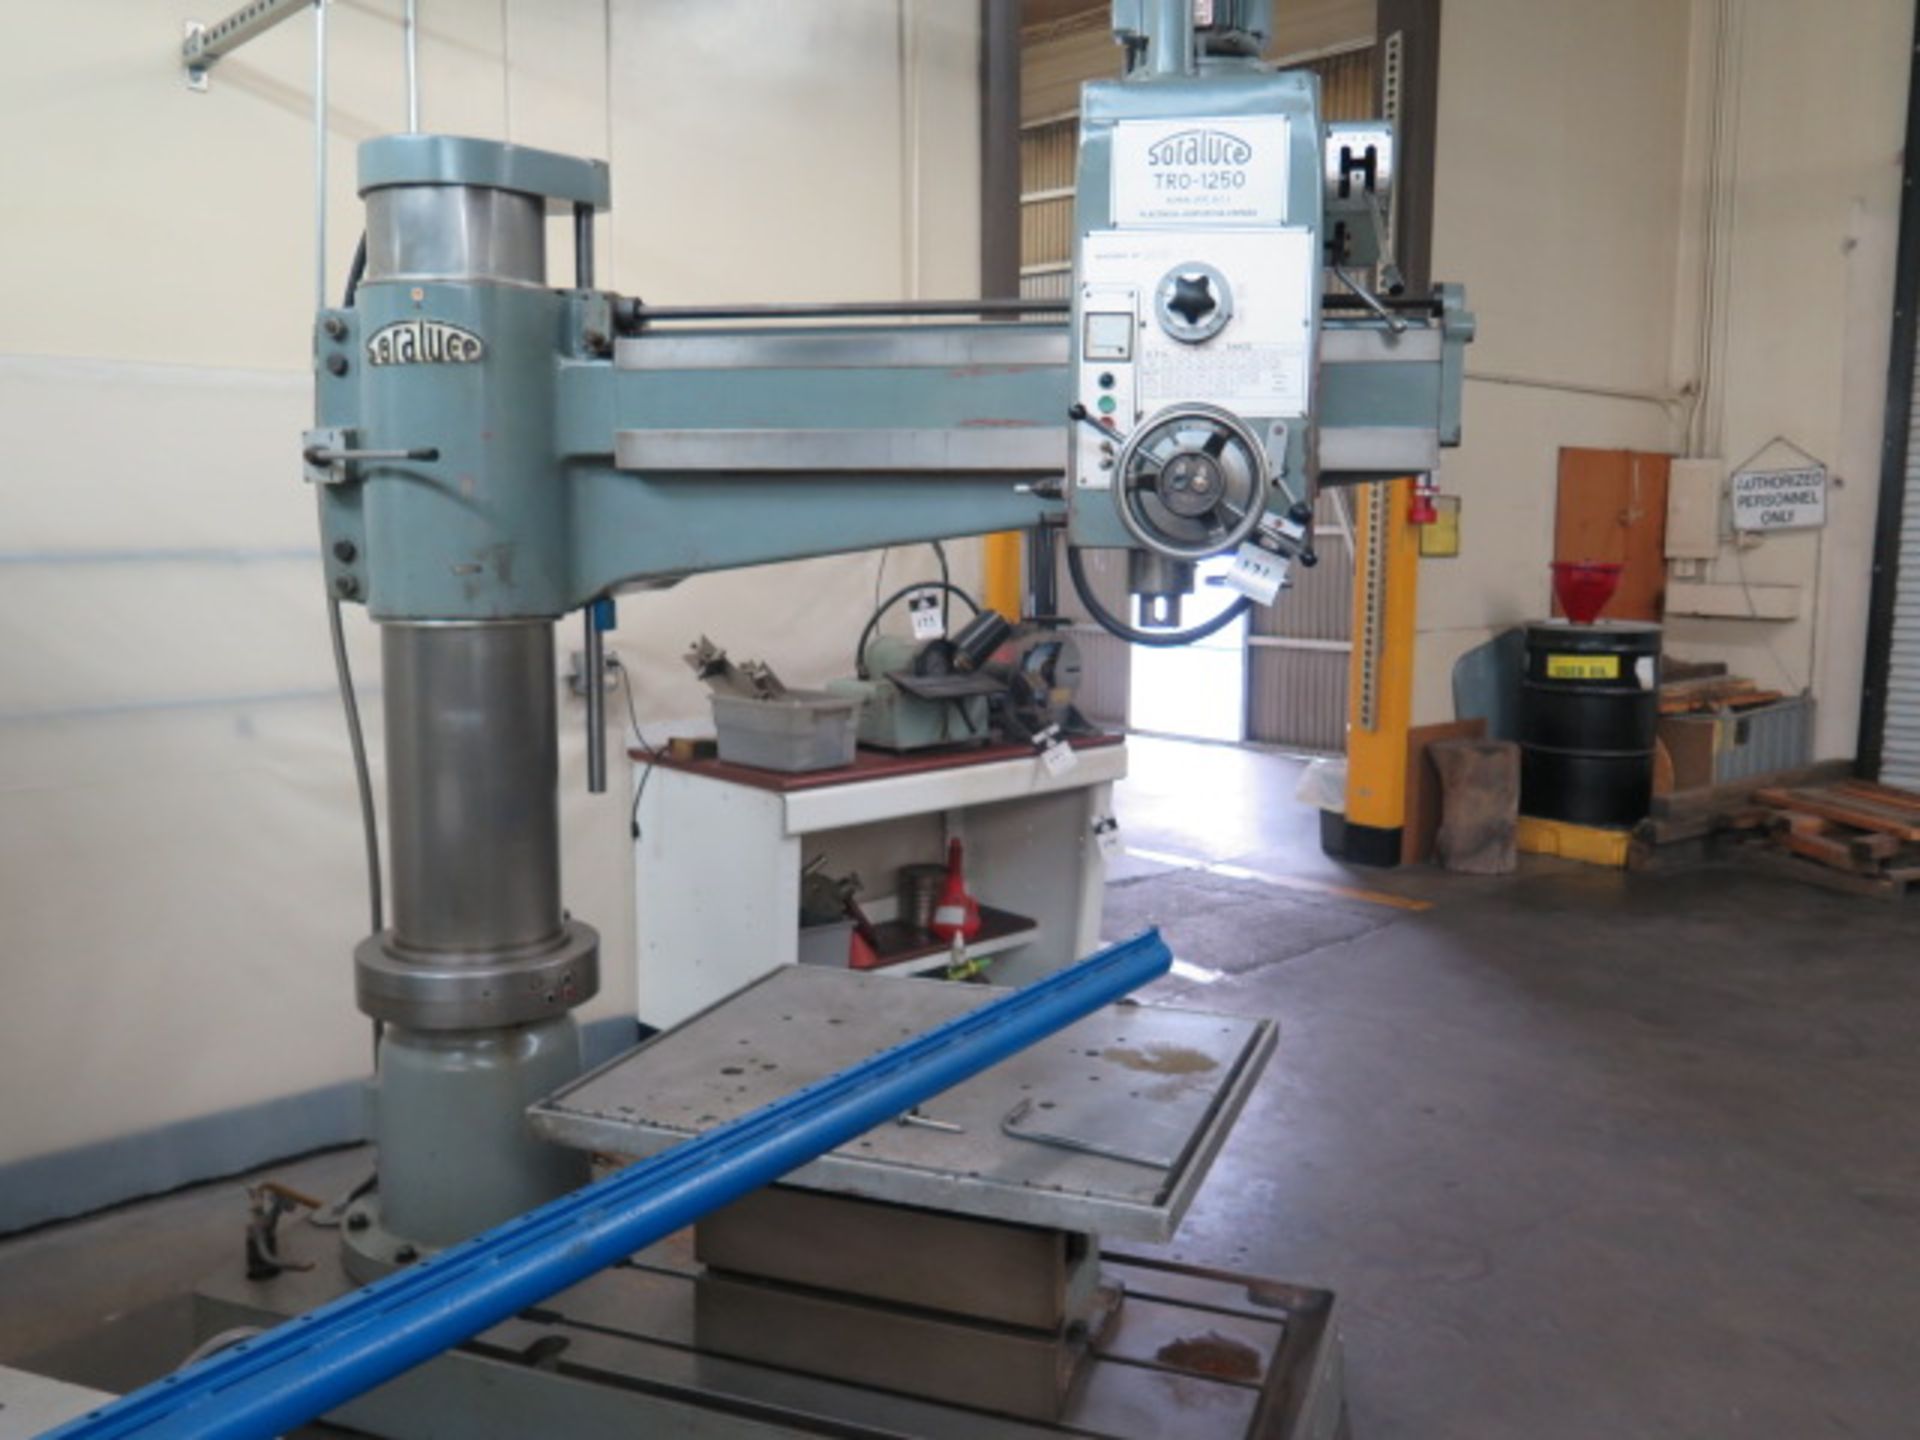 Soraluce TR0-1250 11” Column x 36” Radial Arm Drill s/n 3208-10208 w/ 29-1700 RPM, SOLD AS IS